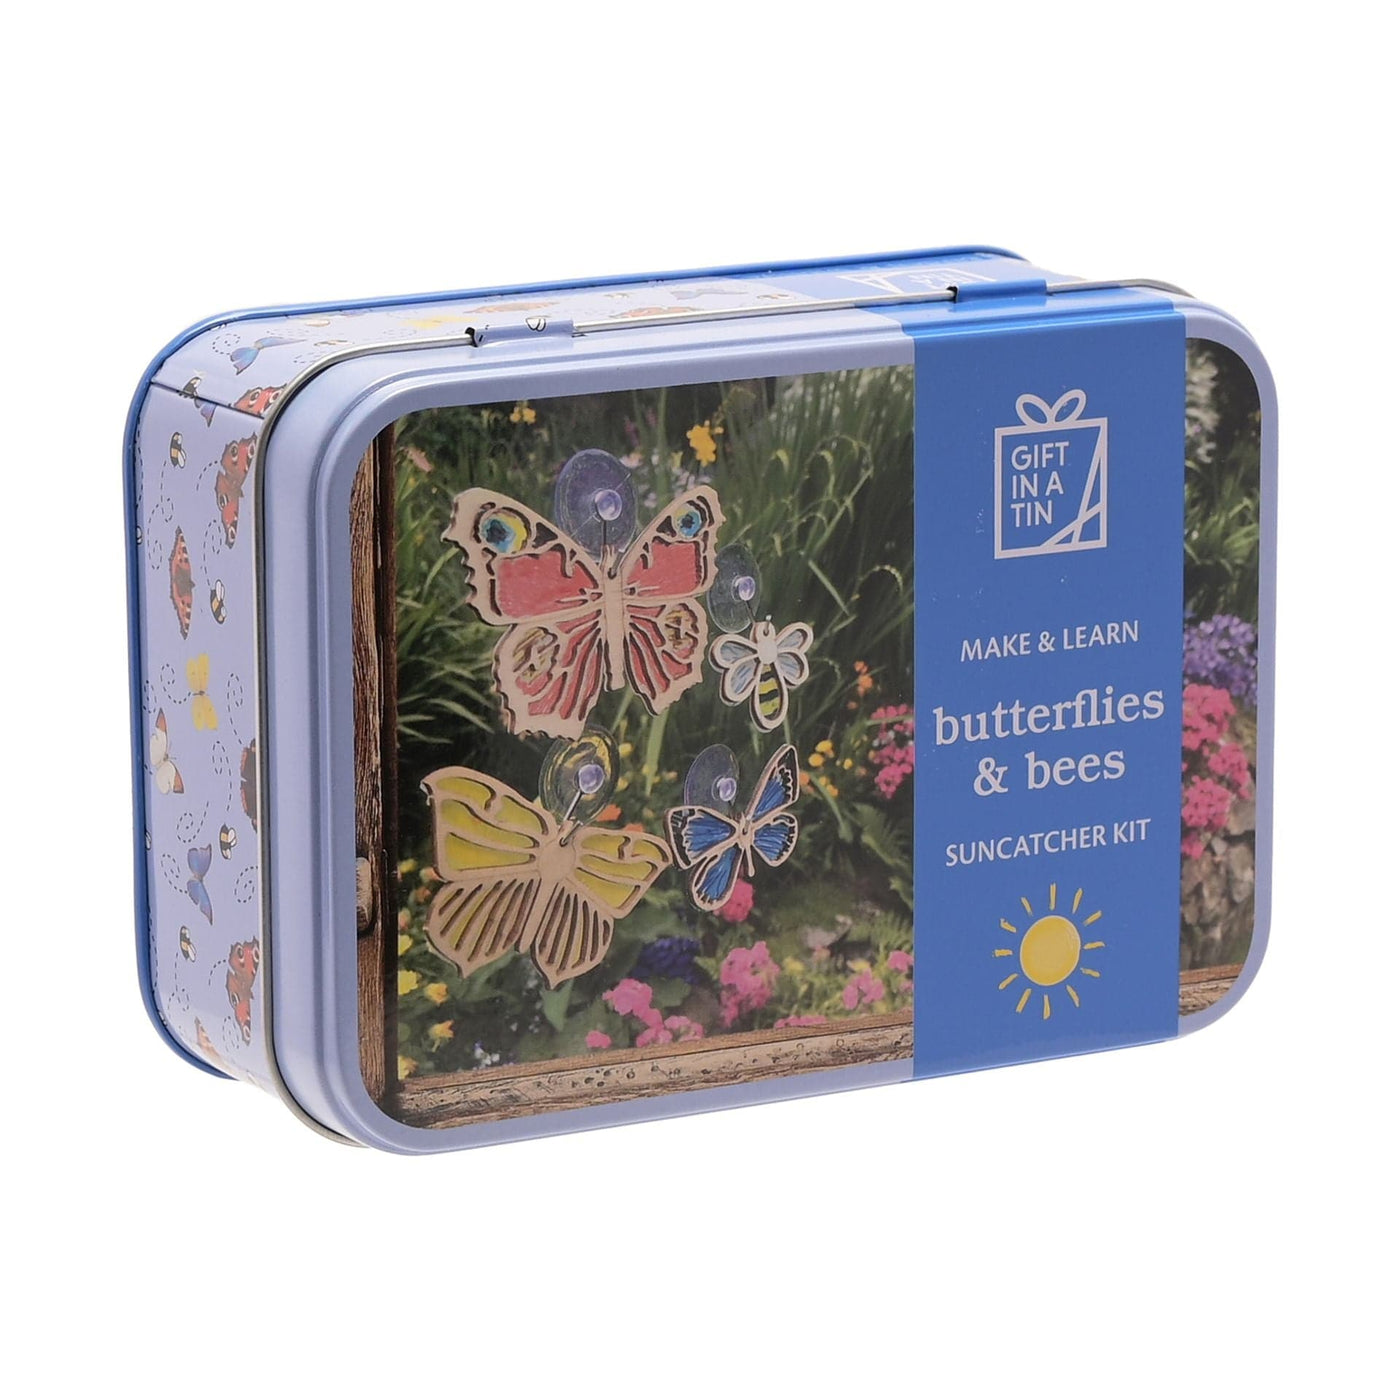 Widdop Gifts Novelty Gifts Make Your Own Sun Catcher Gift in a Tin